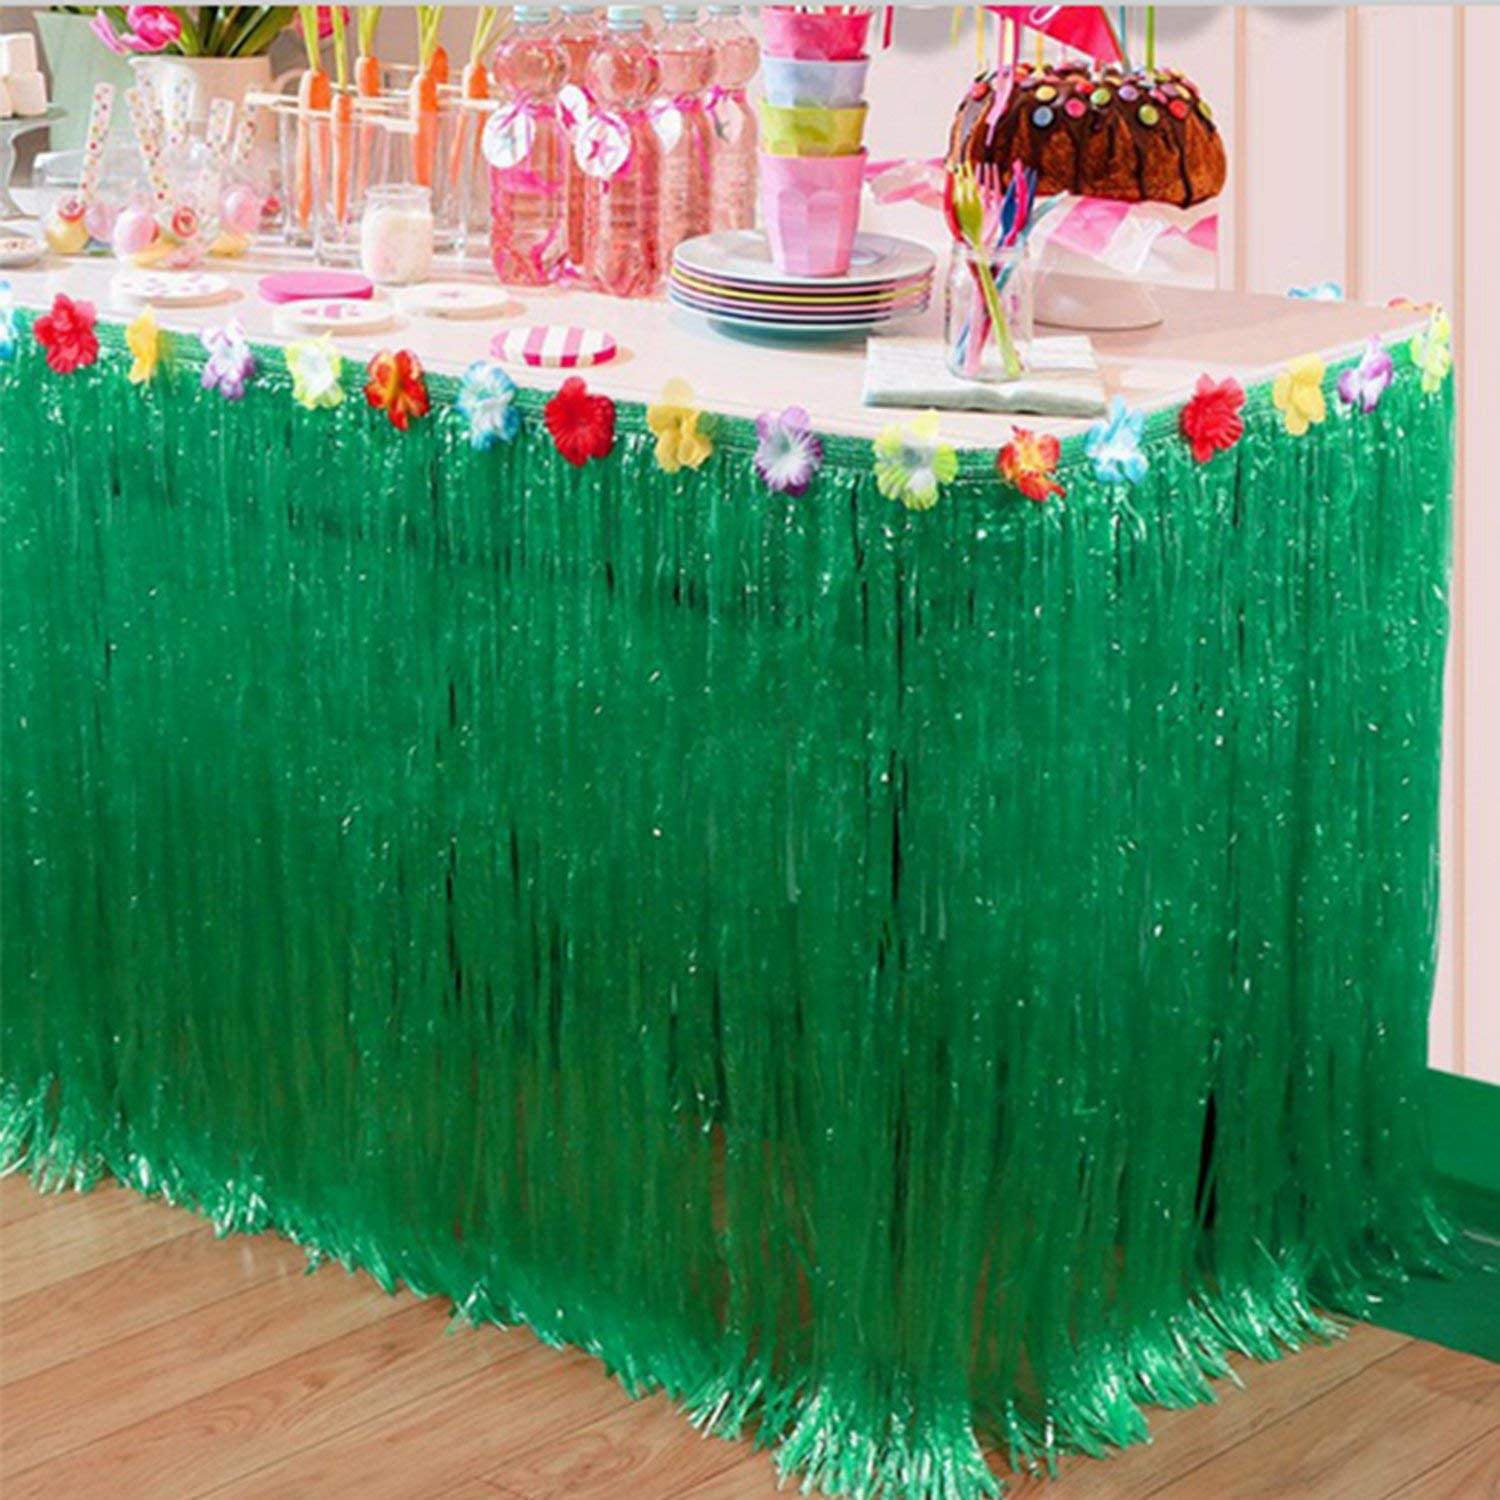 28 x 108 Tiki Table Topper Grass Skirt With Multi-colored Floral Trim Garden Beach Picnic Summer Party Decoration Marry Acting Hawaiian Tropical Table Skirt Gold 